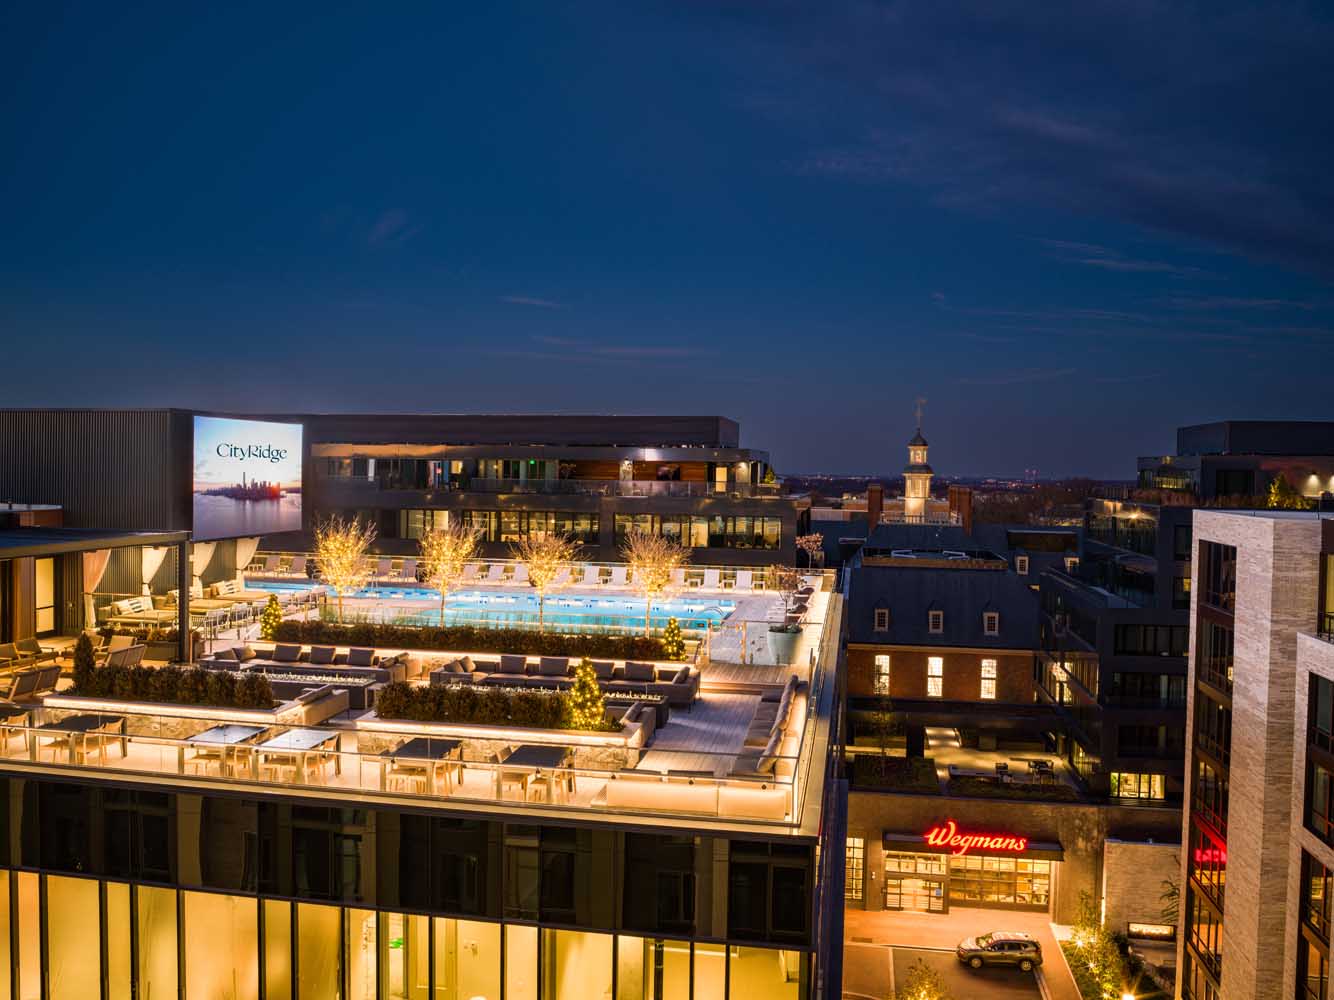 The Ridge Club is a rooftop oasis with boasting two pools, an outdoor theater screen and indoor-outdoor dining options